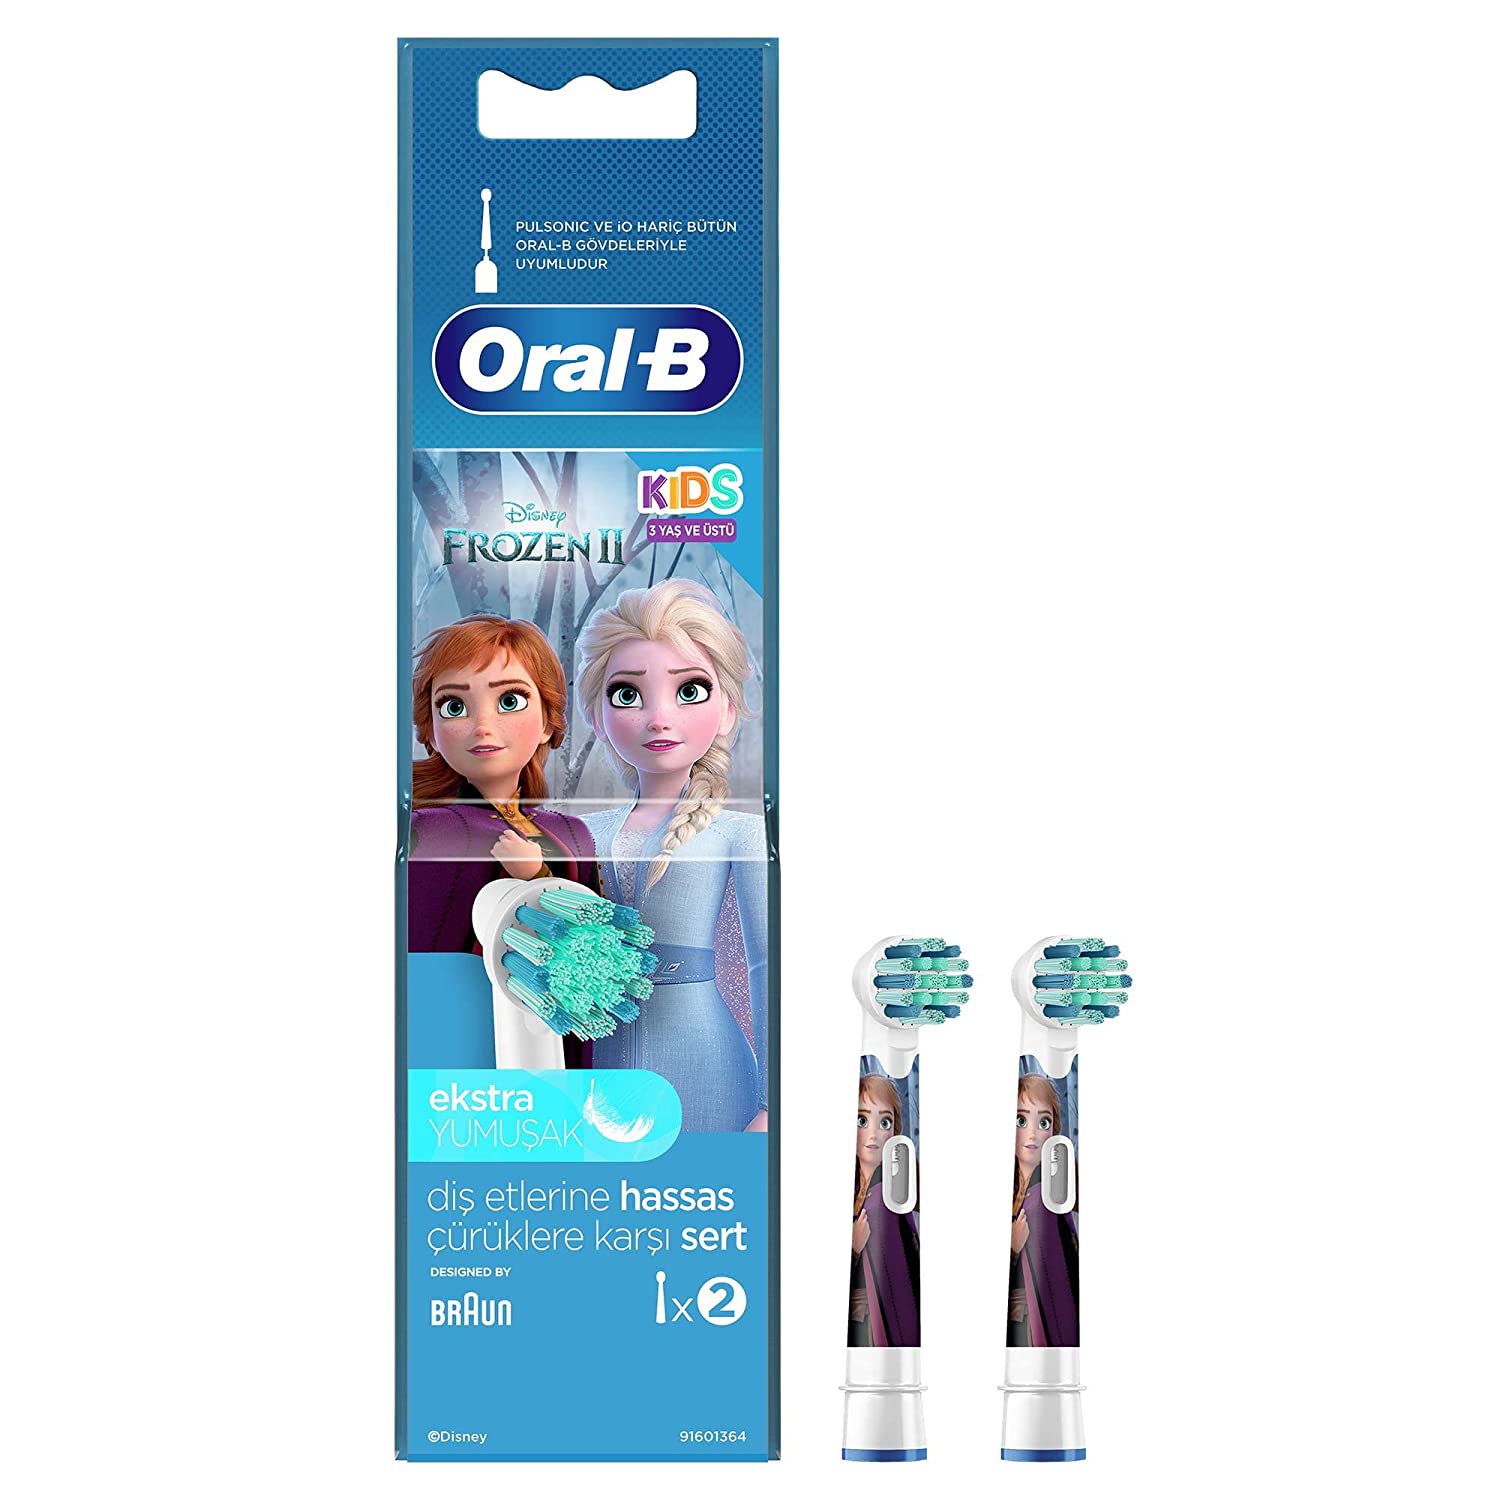 Oral-B Kids Electric Rechargeable Toothbrush Heads Replacement Refills Featuring Disney Frozen